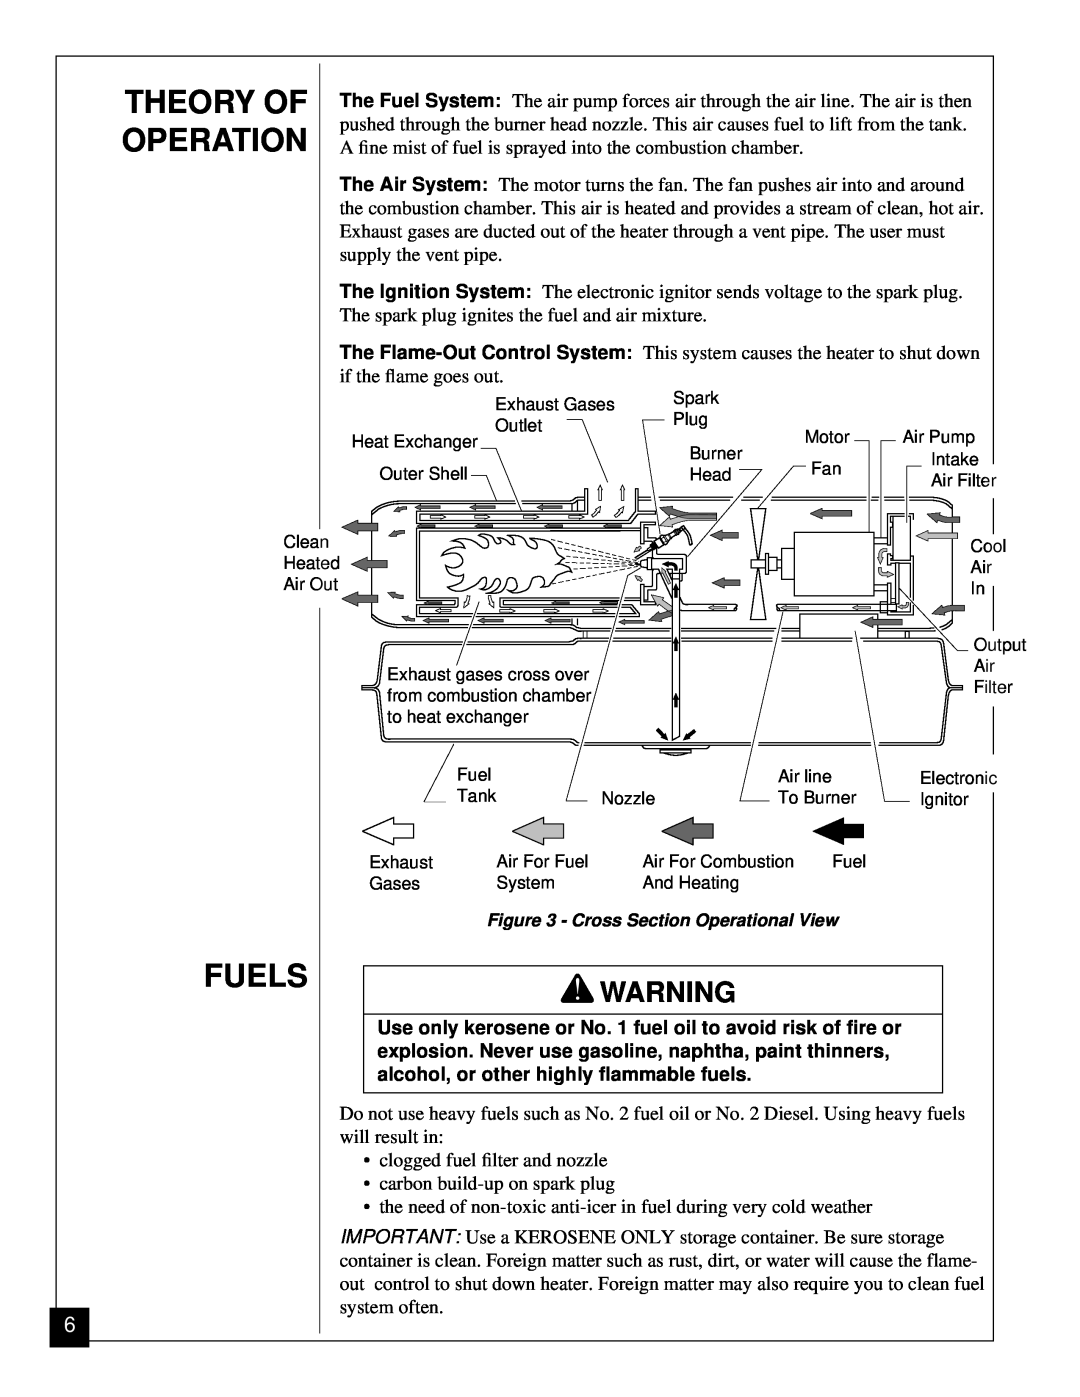 Desa RV125EDI owner manual Theory Of Operation, Fuels, The Flame-OutControl System 